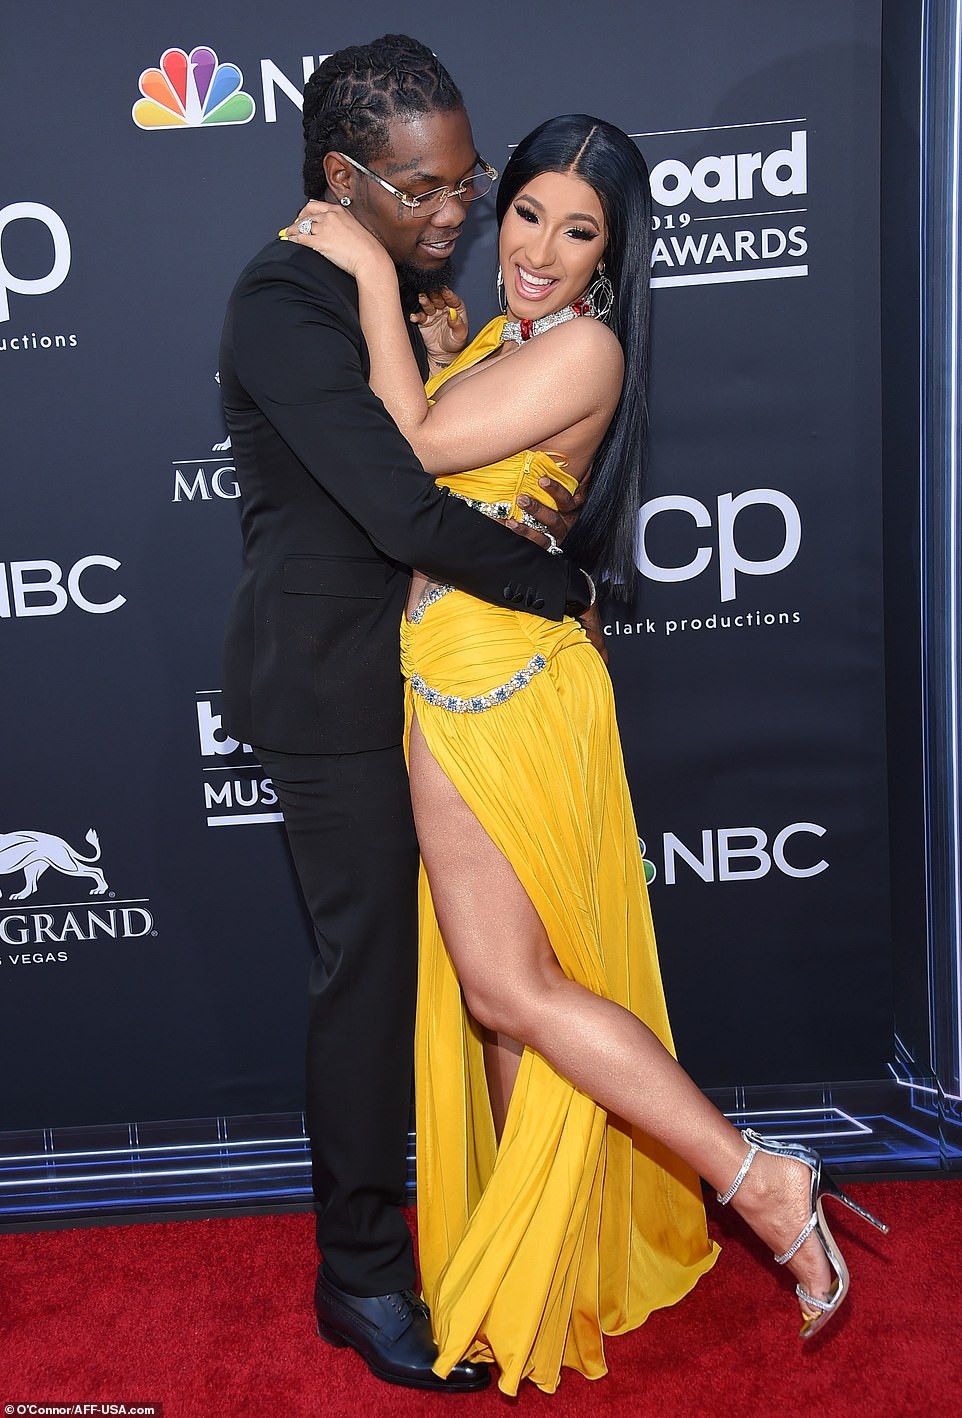 Cardi b's outfit stirs up commotion at bill board music award (photos)...